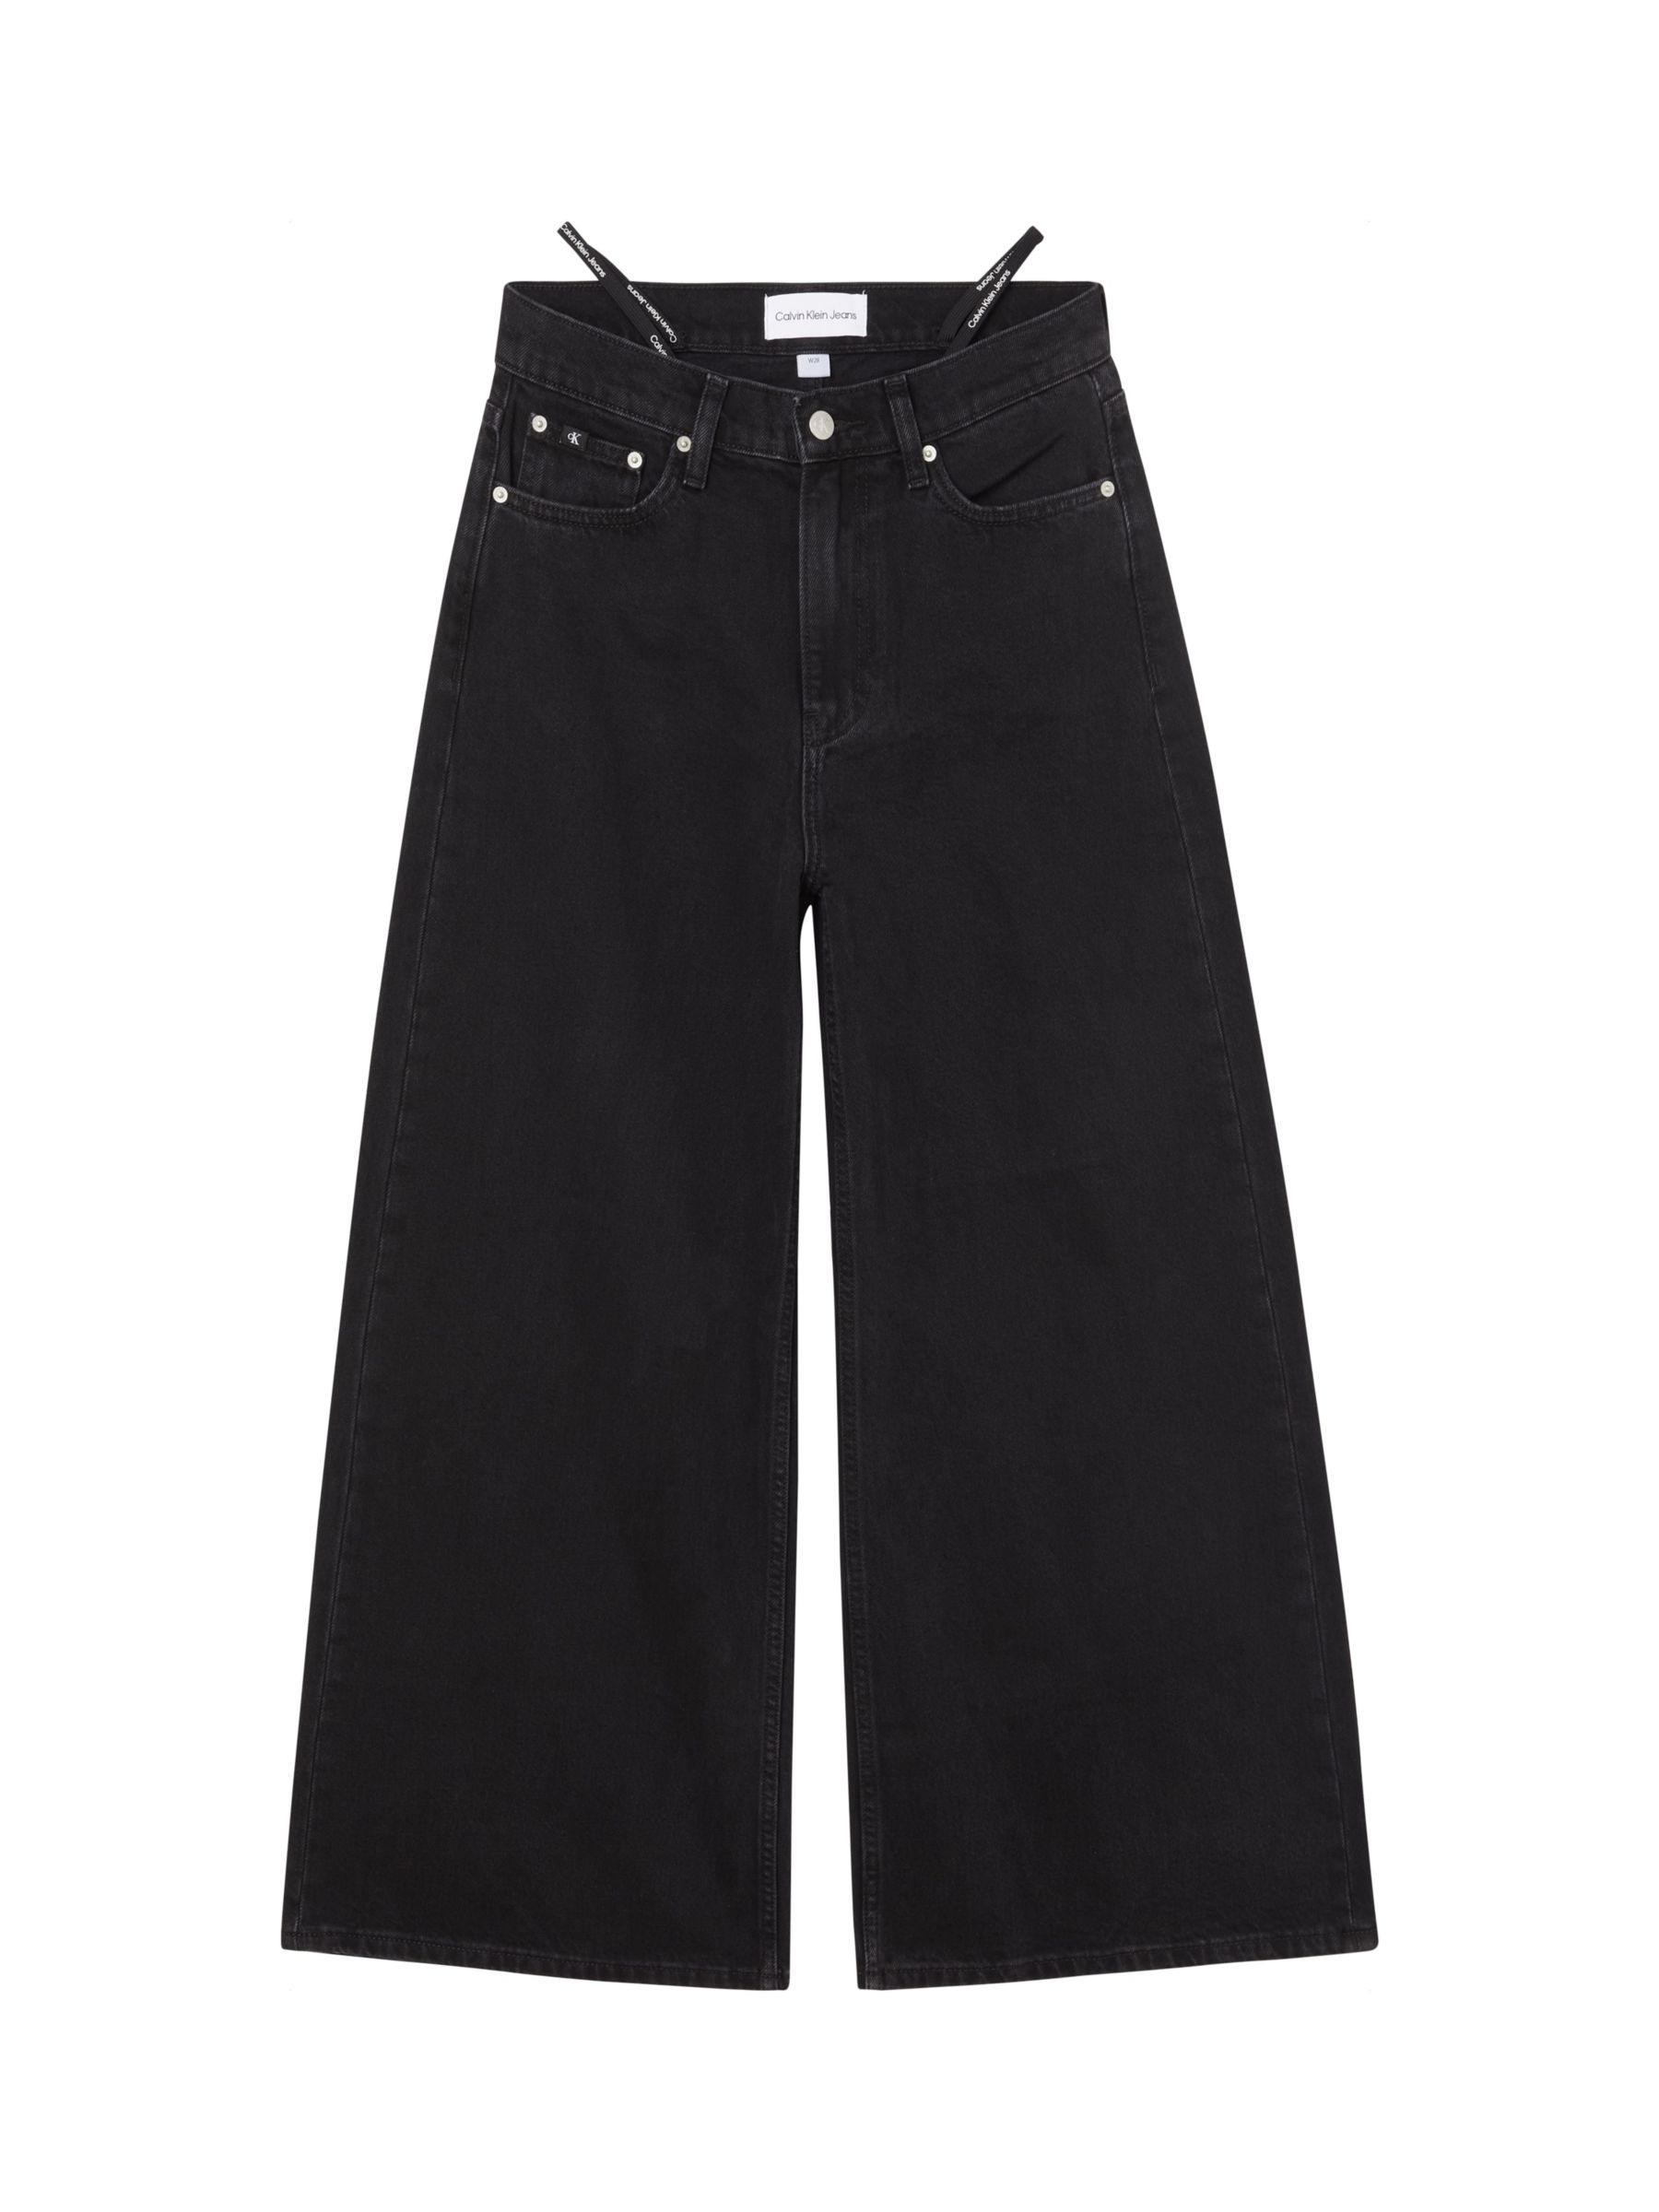 Calvin Klein Low Rise Relaxed Jeans, Black, 30R